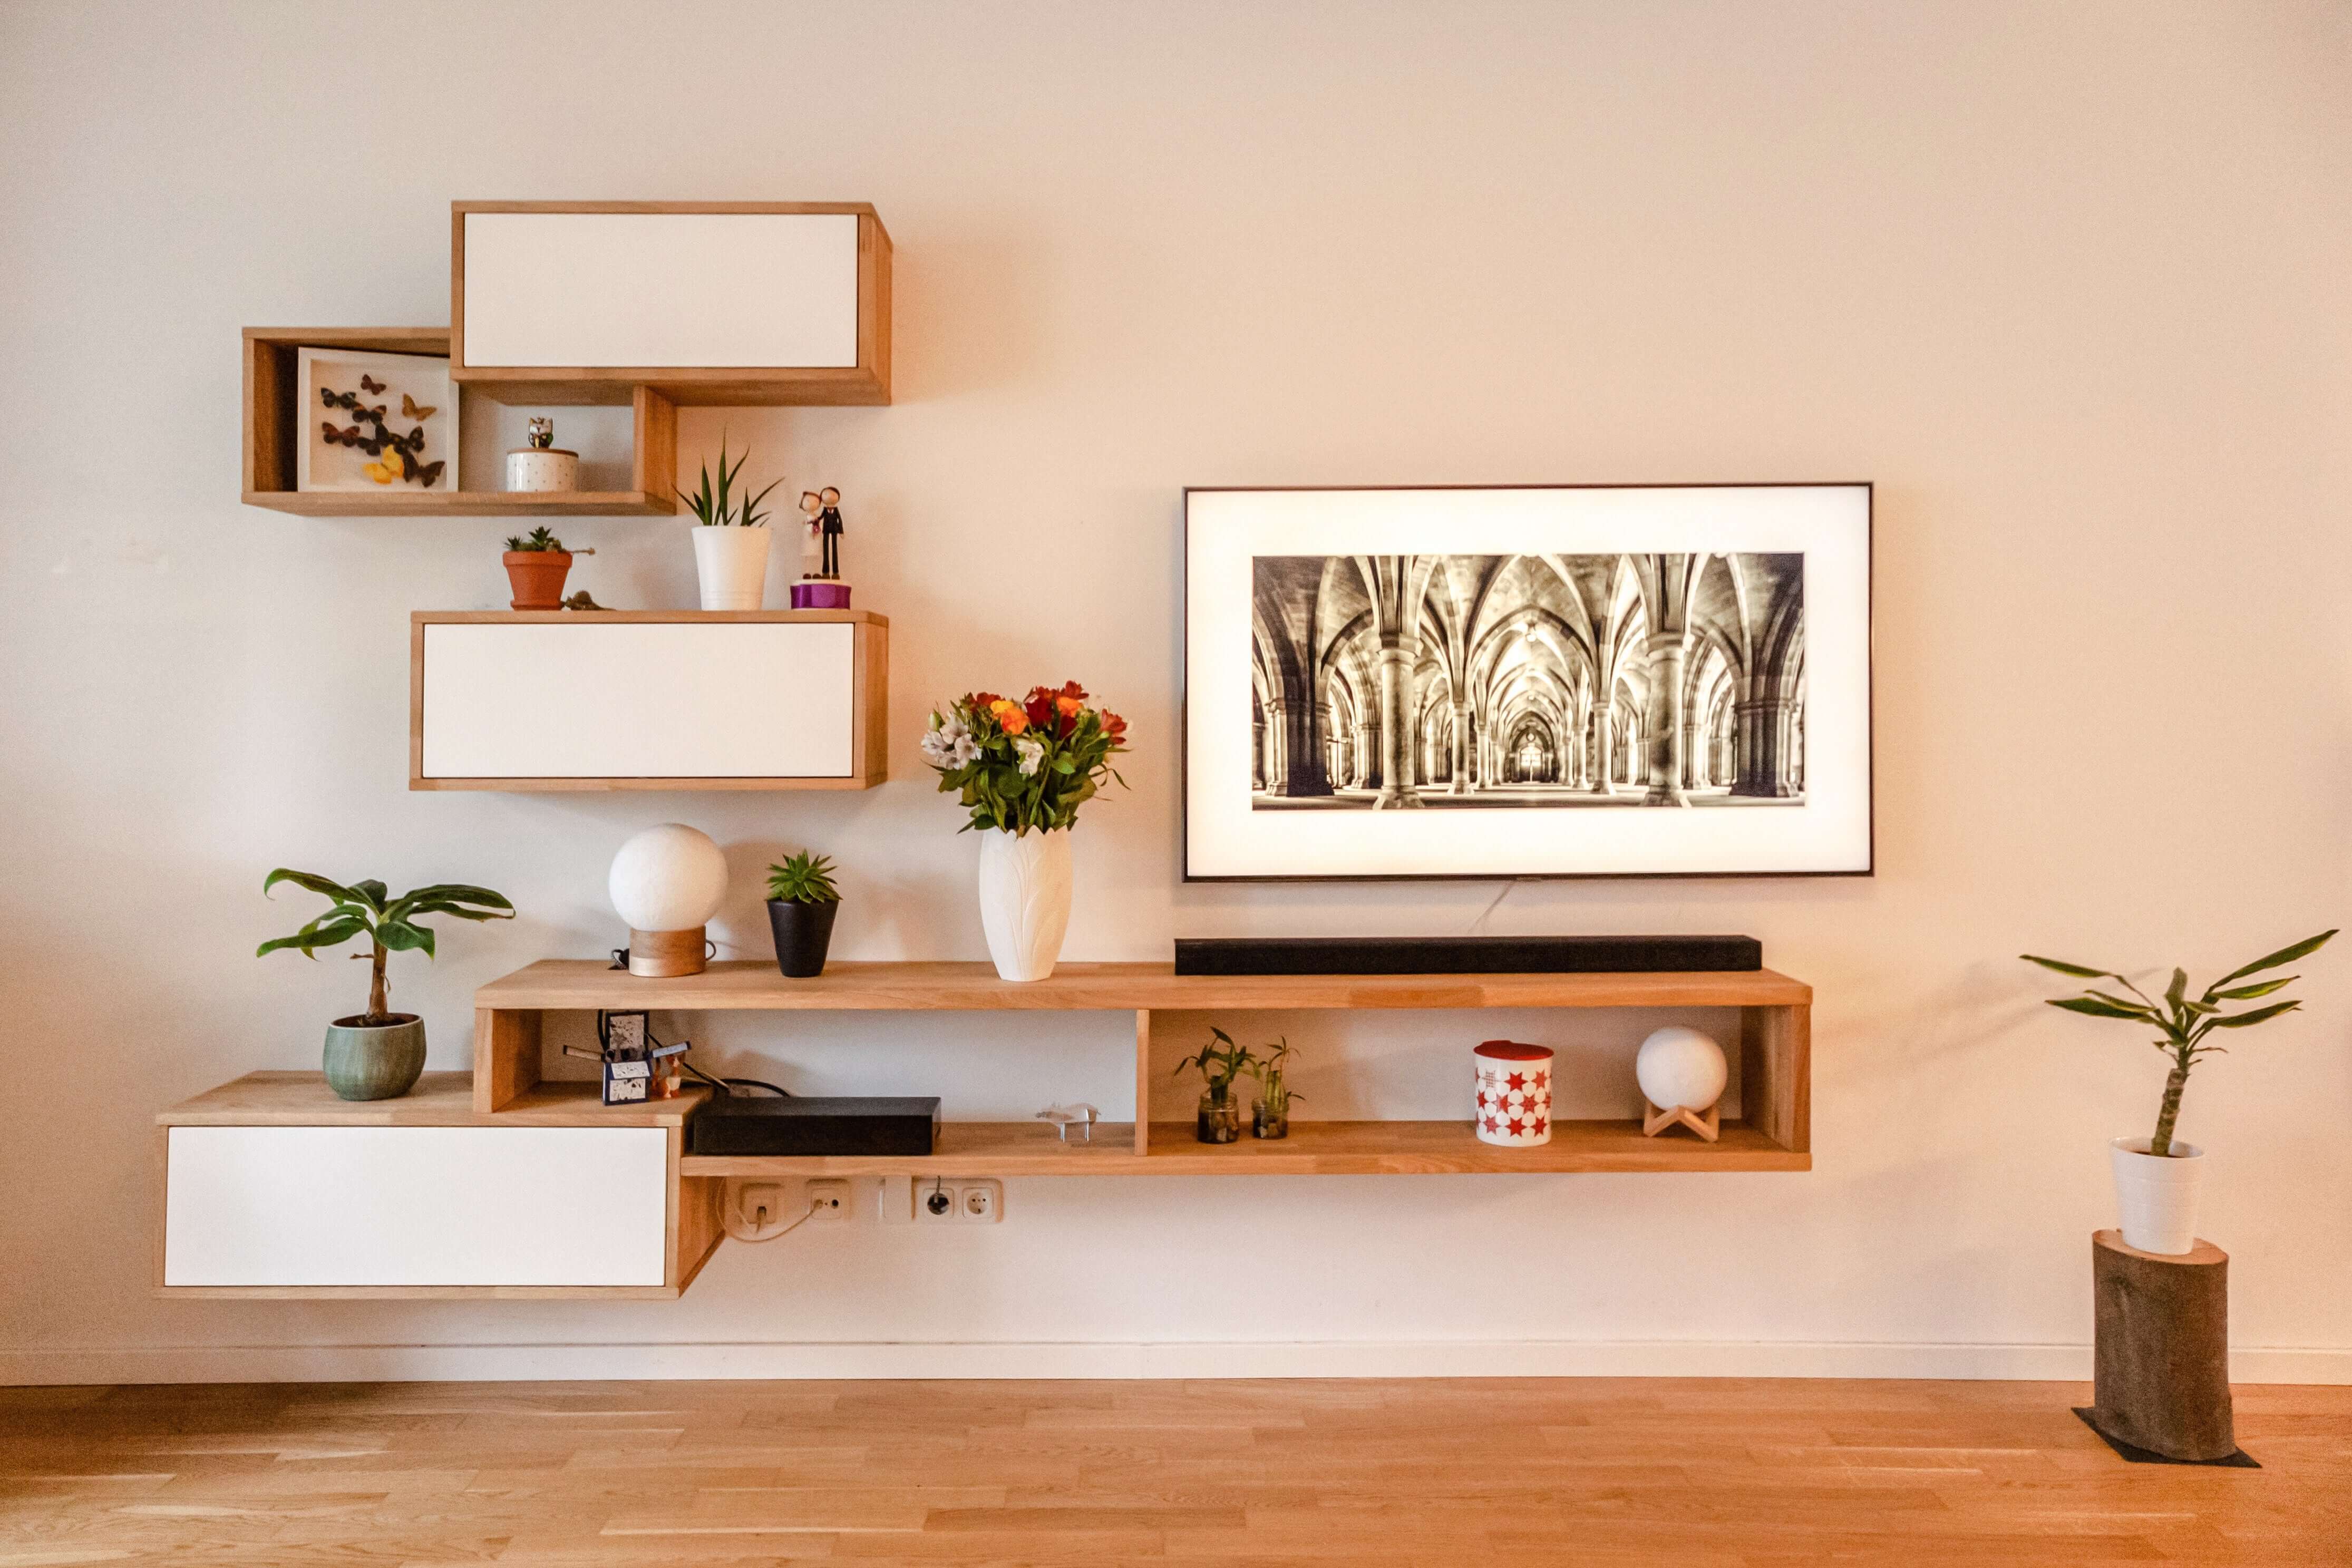 Solid Wood Shelves Setup on a Wall with Plants and Framed Picture.